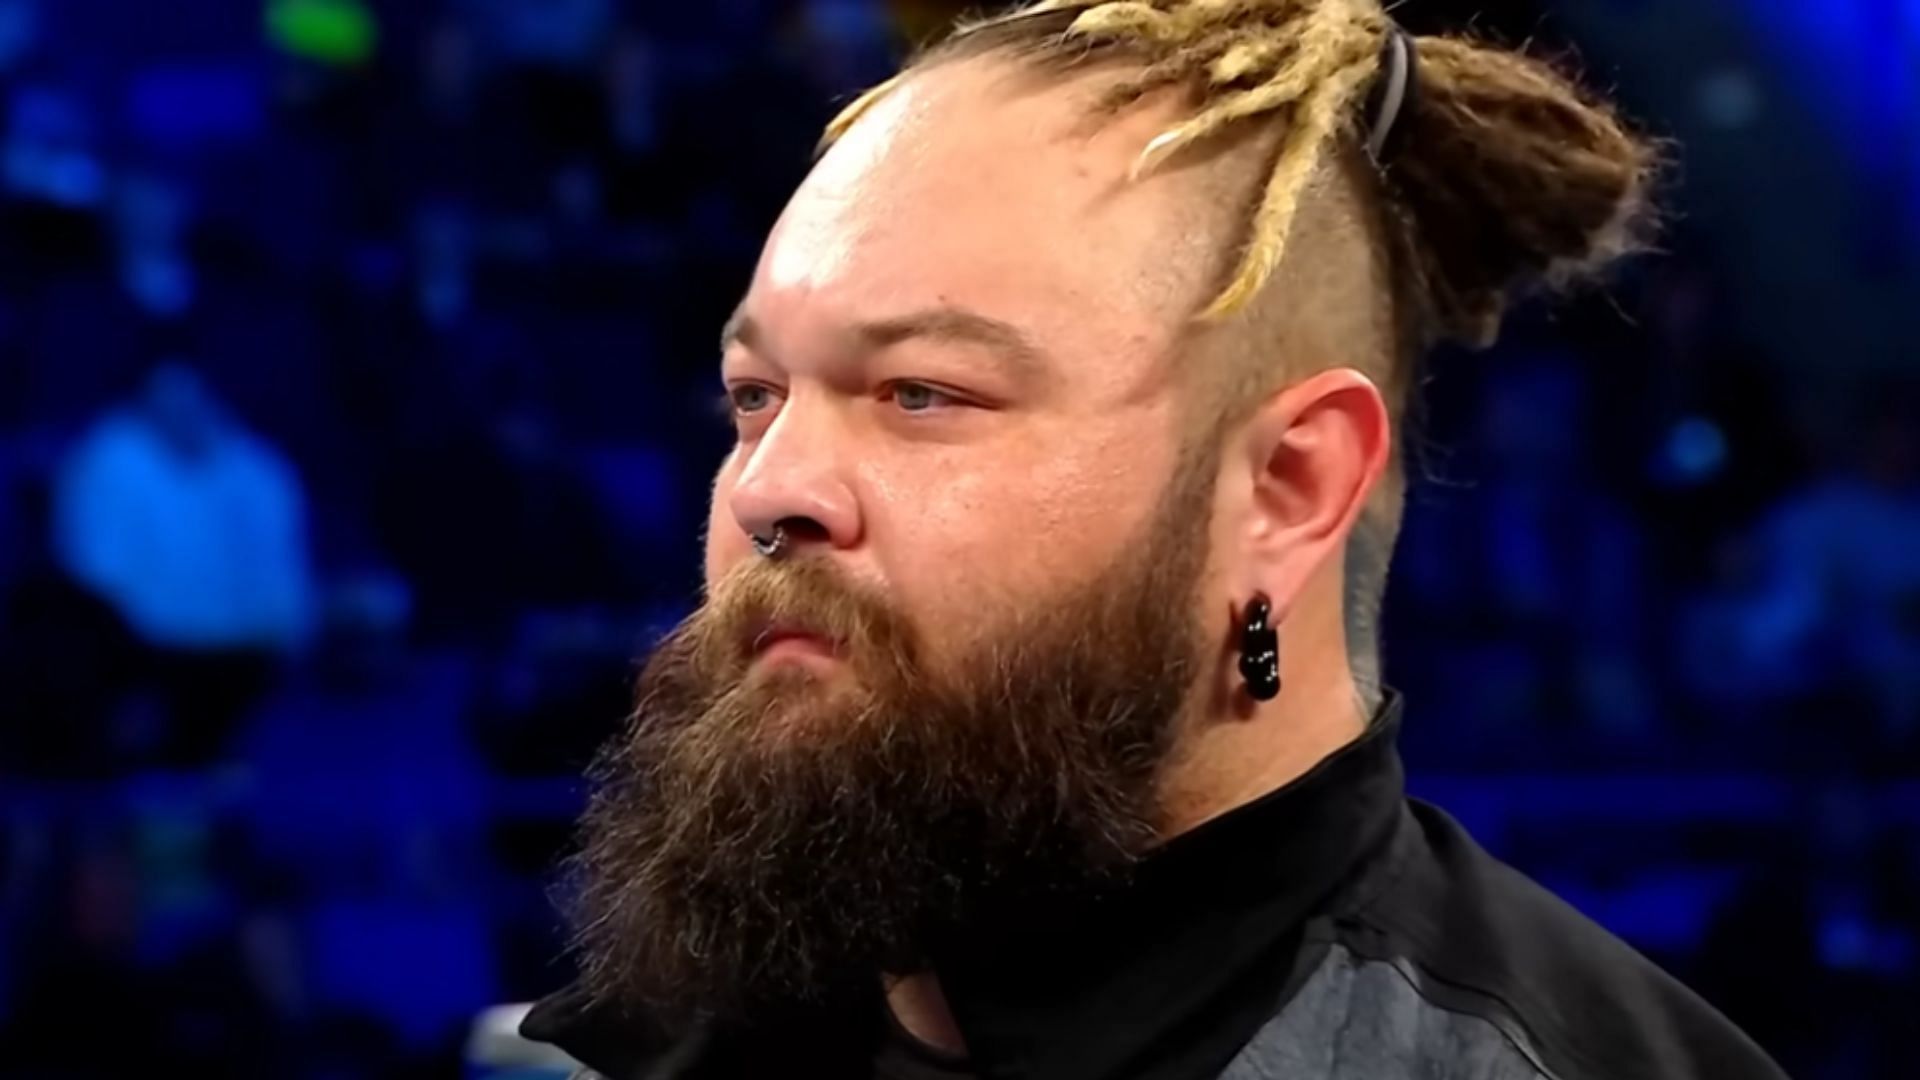 Bray Wyatt is a former Universal and WWE Champion